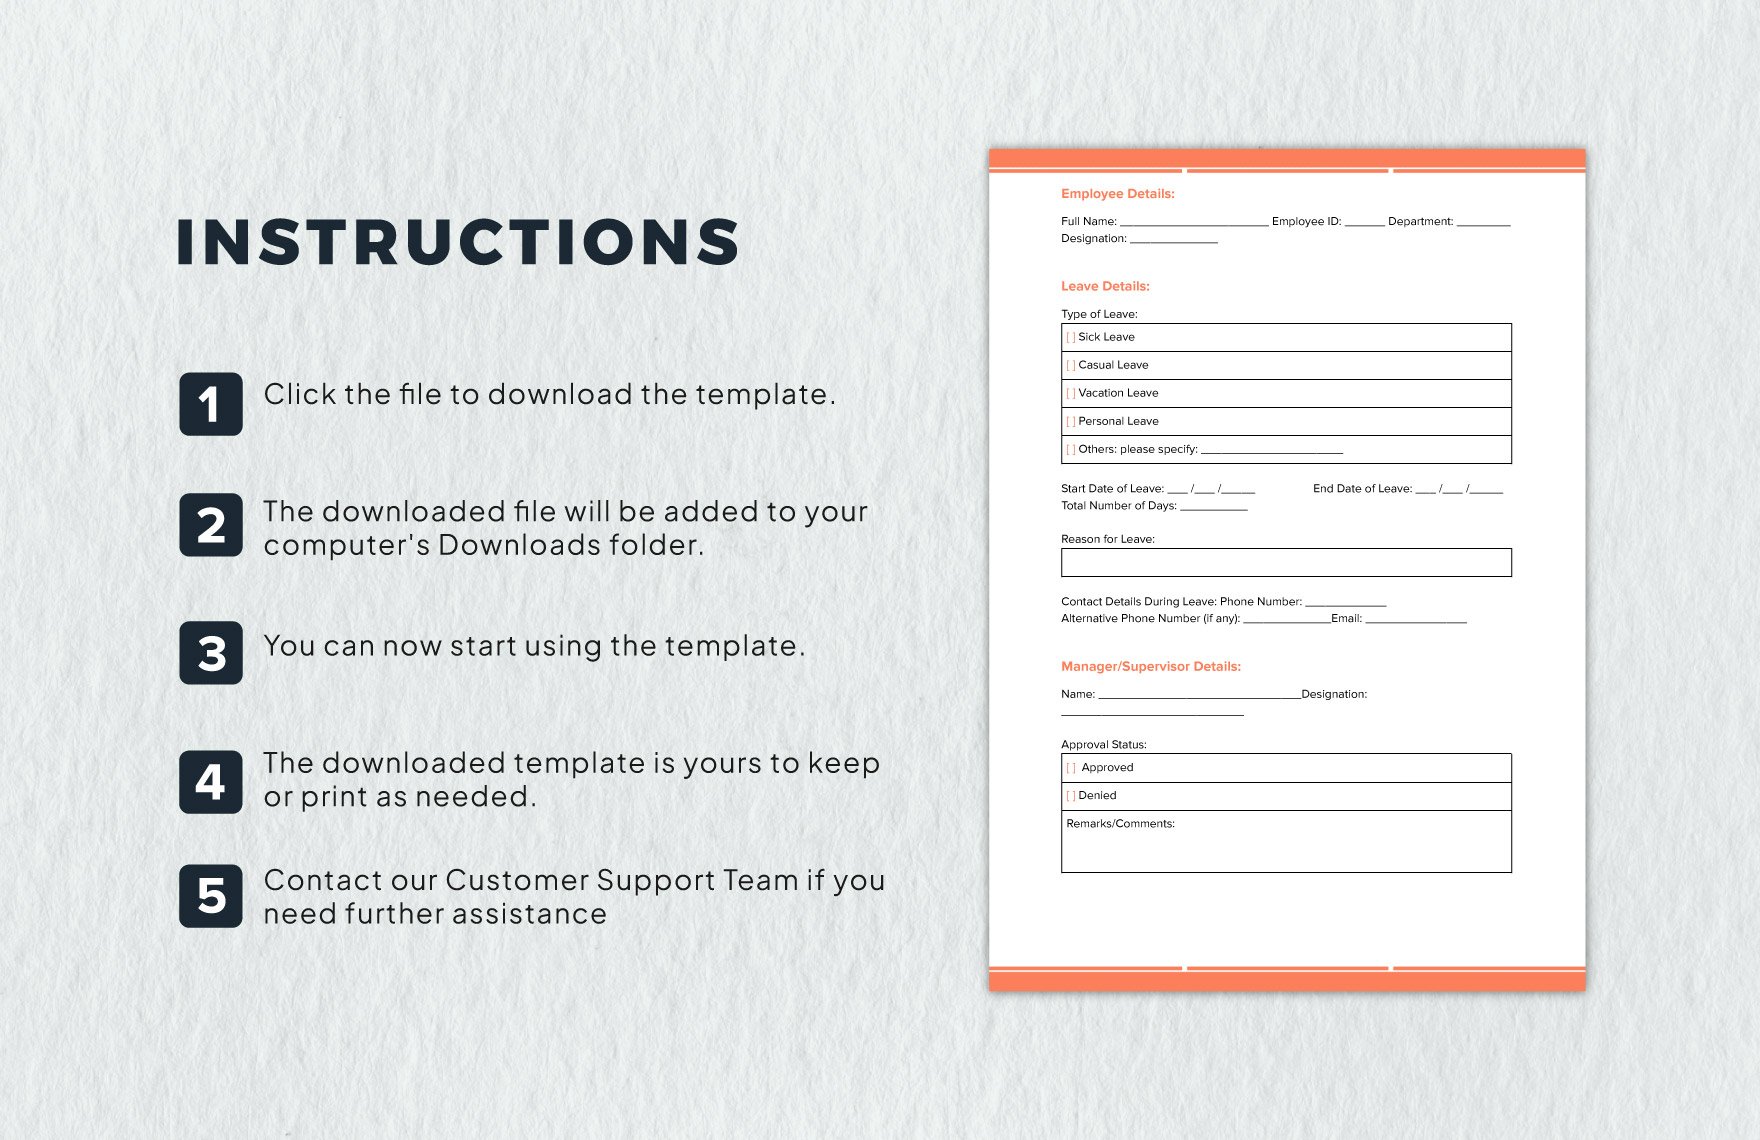 Leave Application Template